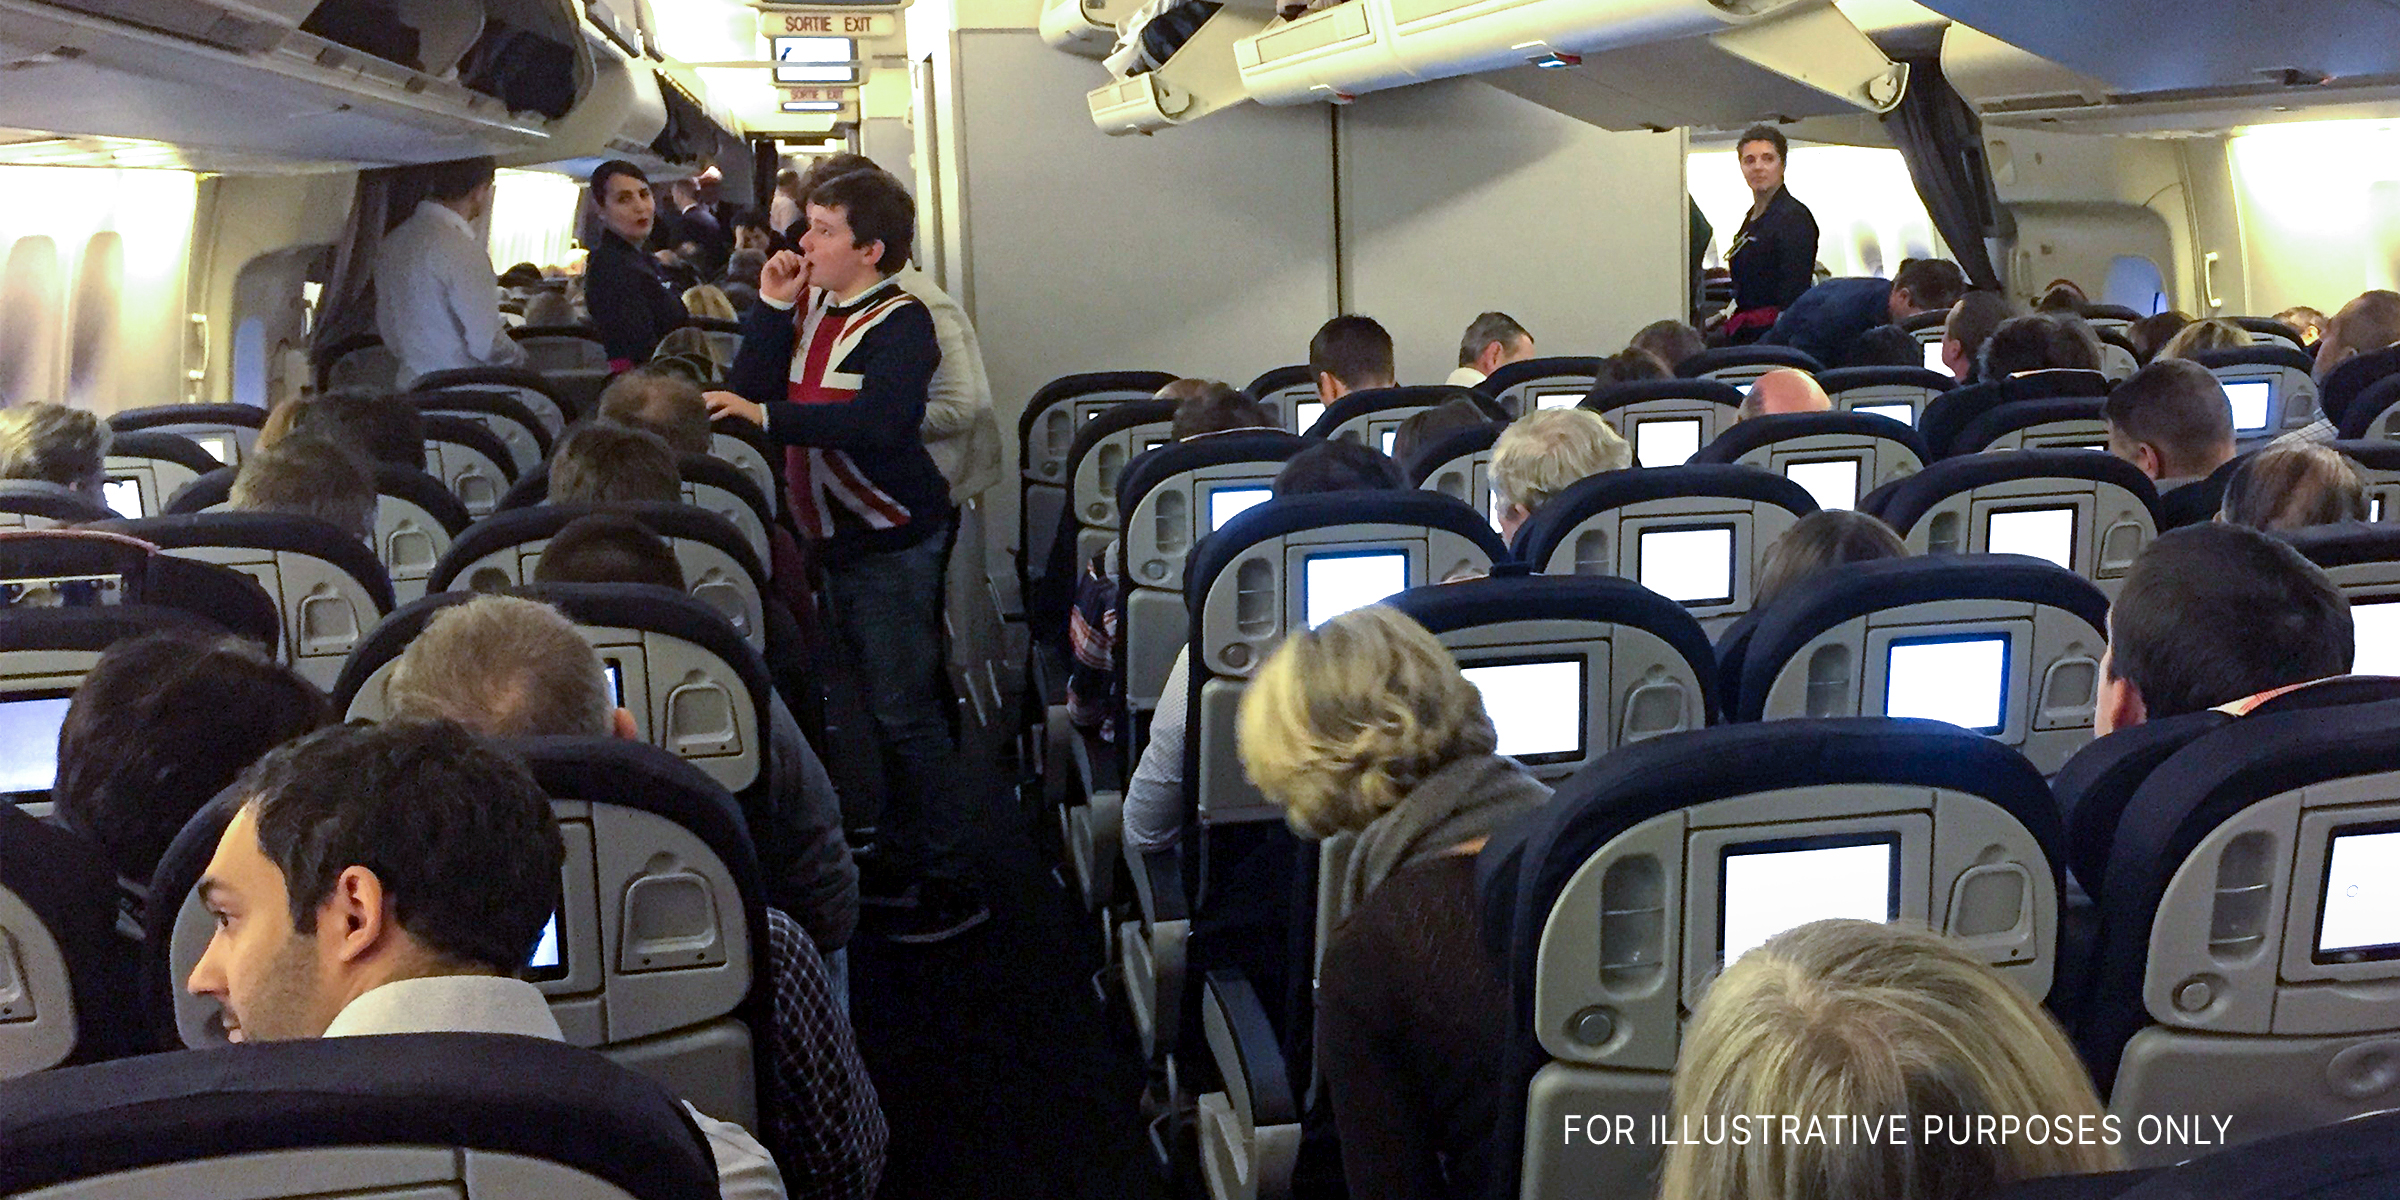 The inside cabin of an aircraft filled with passengers and crew | Source: flickr.com/airlines470/CC BY-SA 2.0